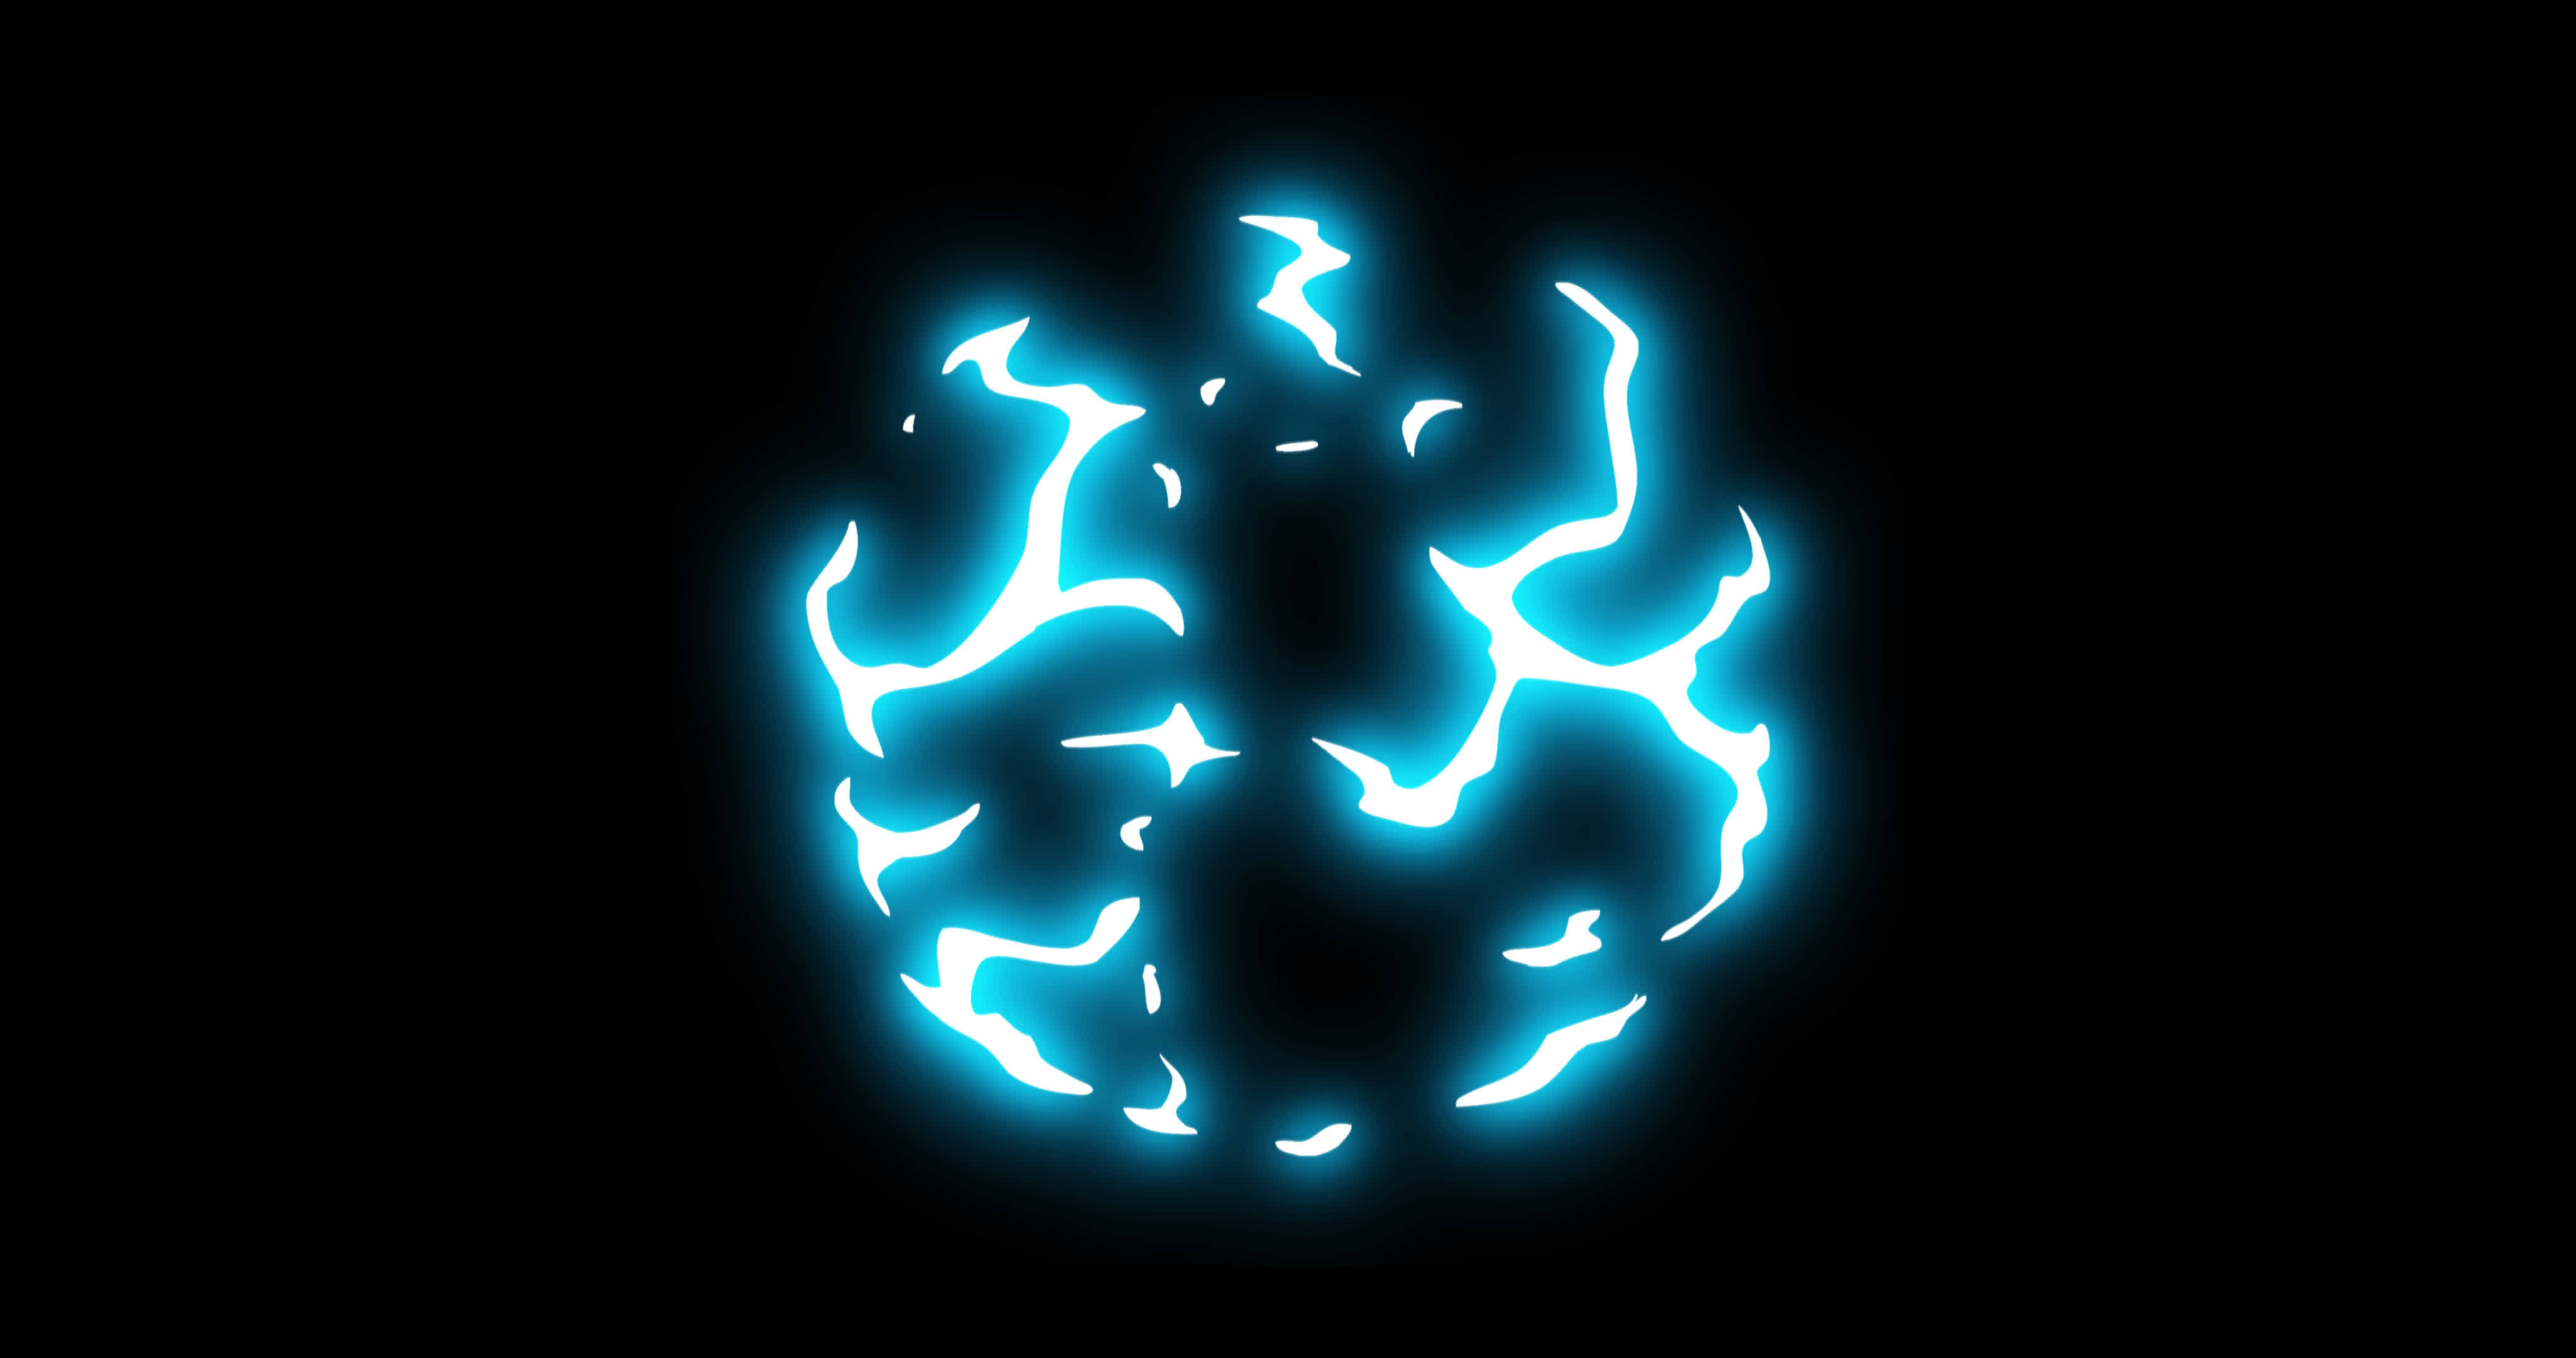 3 Step Ball Cycle Spark Thunder Electrical Cartoon Elements Animation. Ball  Cycle Spark Thunder Electrical Elements with Glow Effect. 4K resolution  with Alpha channel. Drop .mov into your project. 8646594 Stock Video